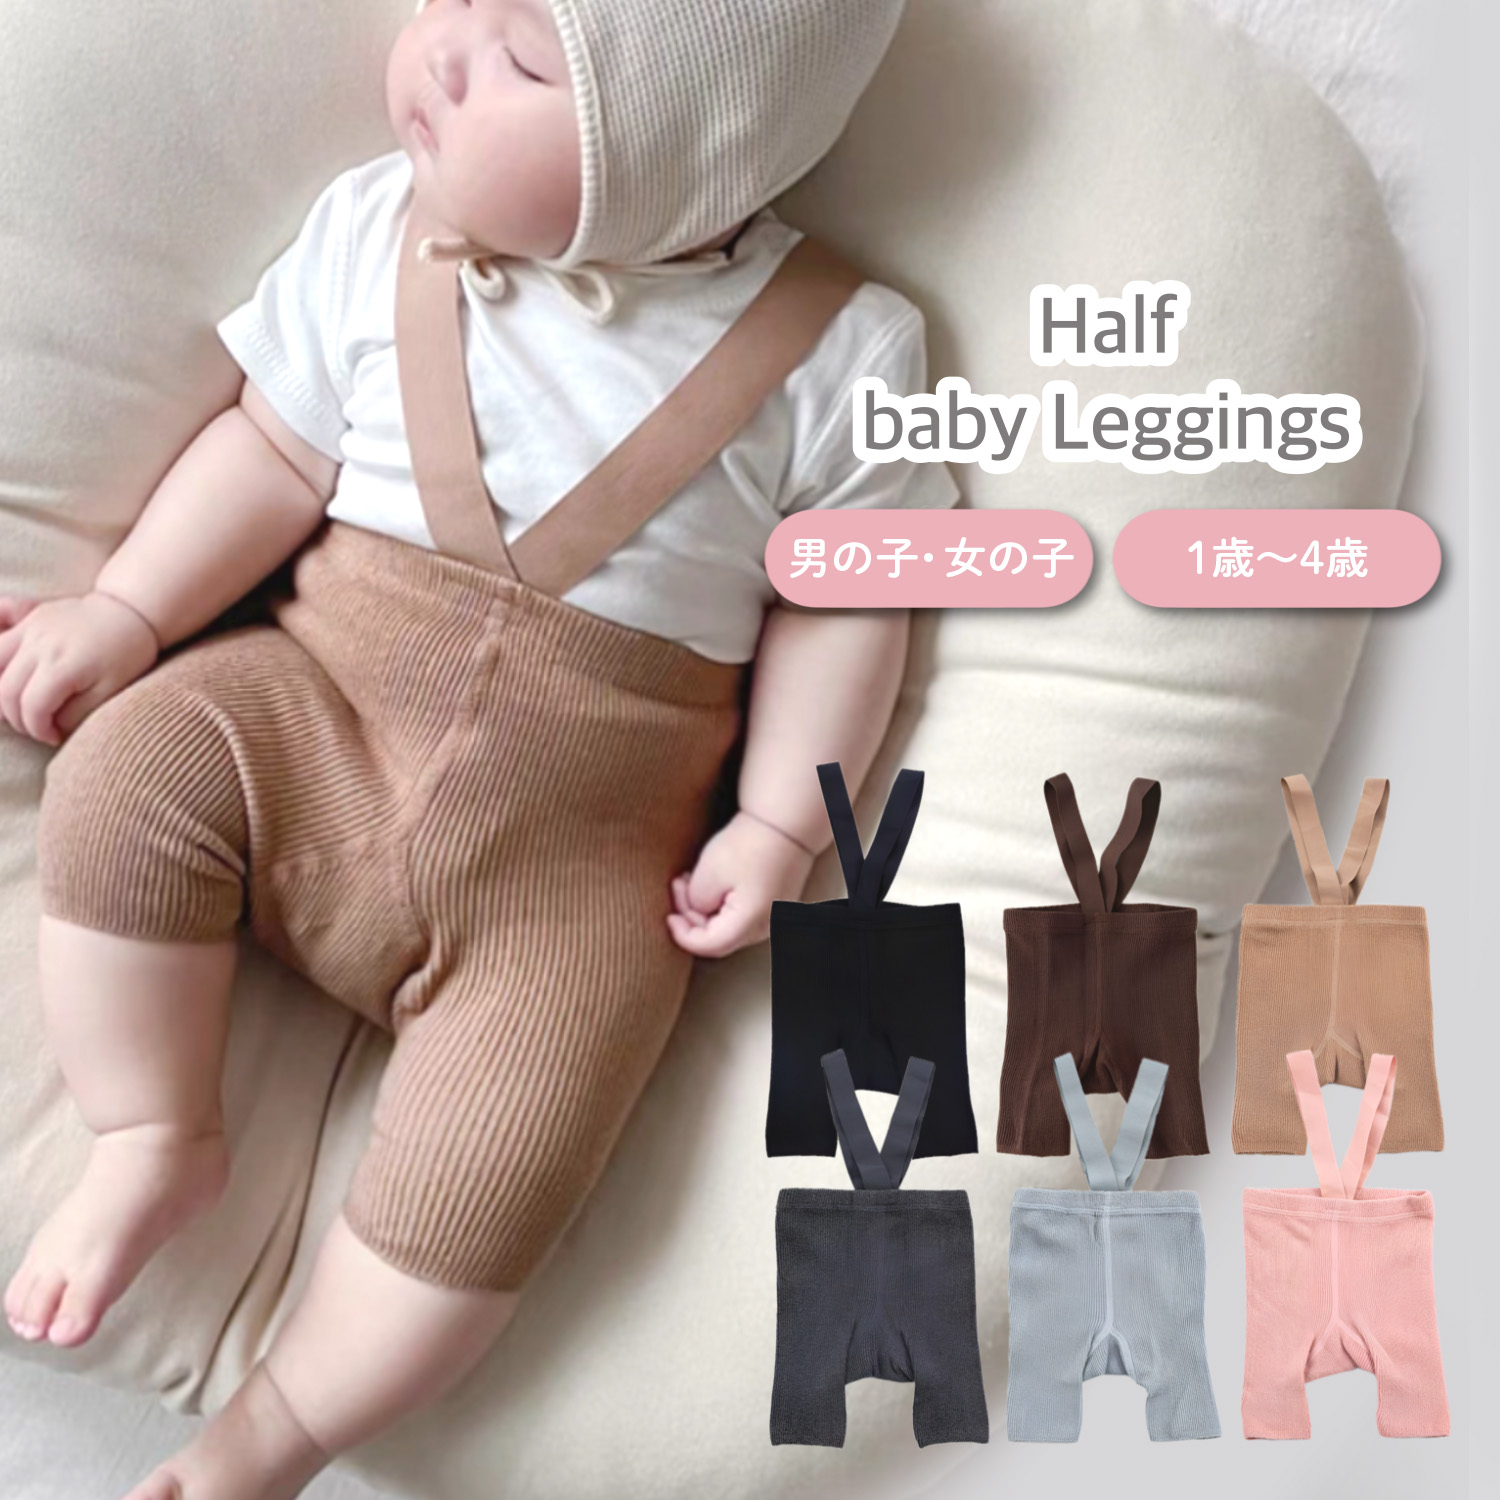  baby leggings spats baby suspenders overall baby clothes Kids strap tights 80 girl man pretty stylish pants rib 90 95 100